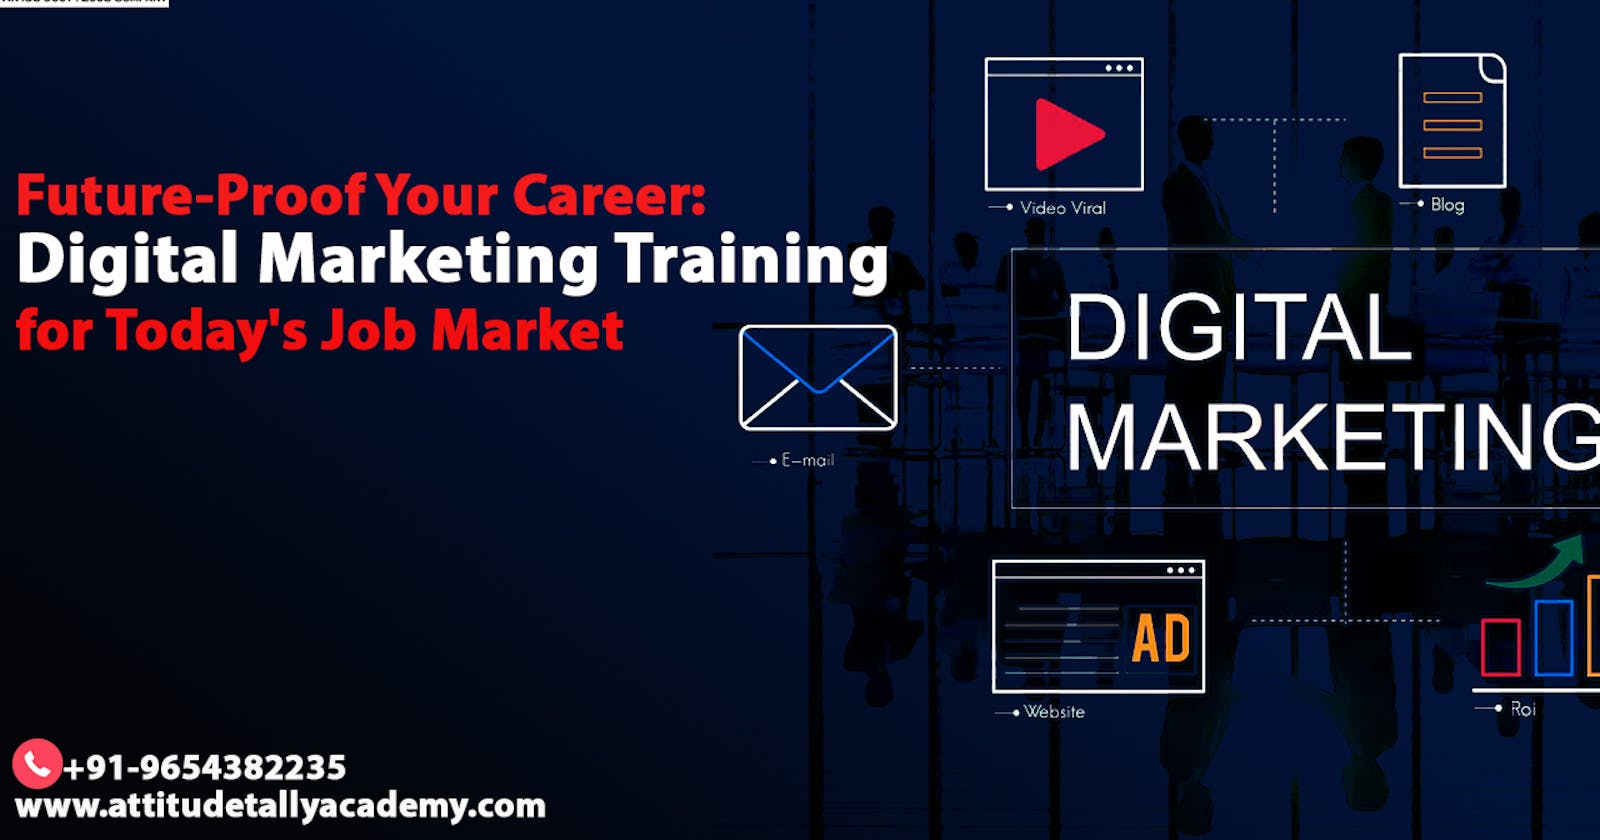 Future-Proof Your Career: Digital Marketing Training for Today's Job Market